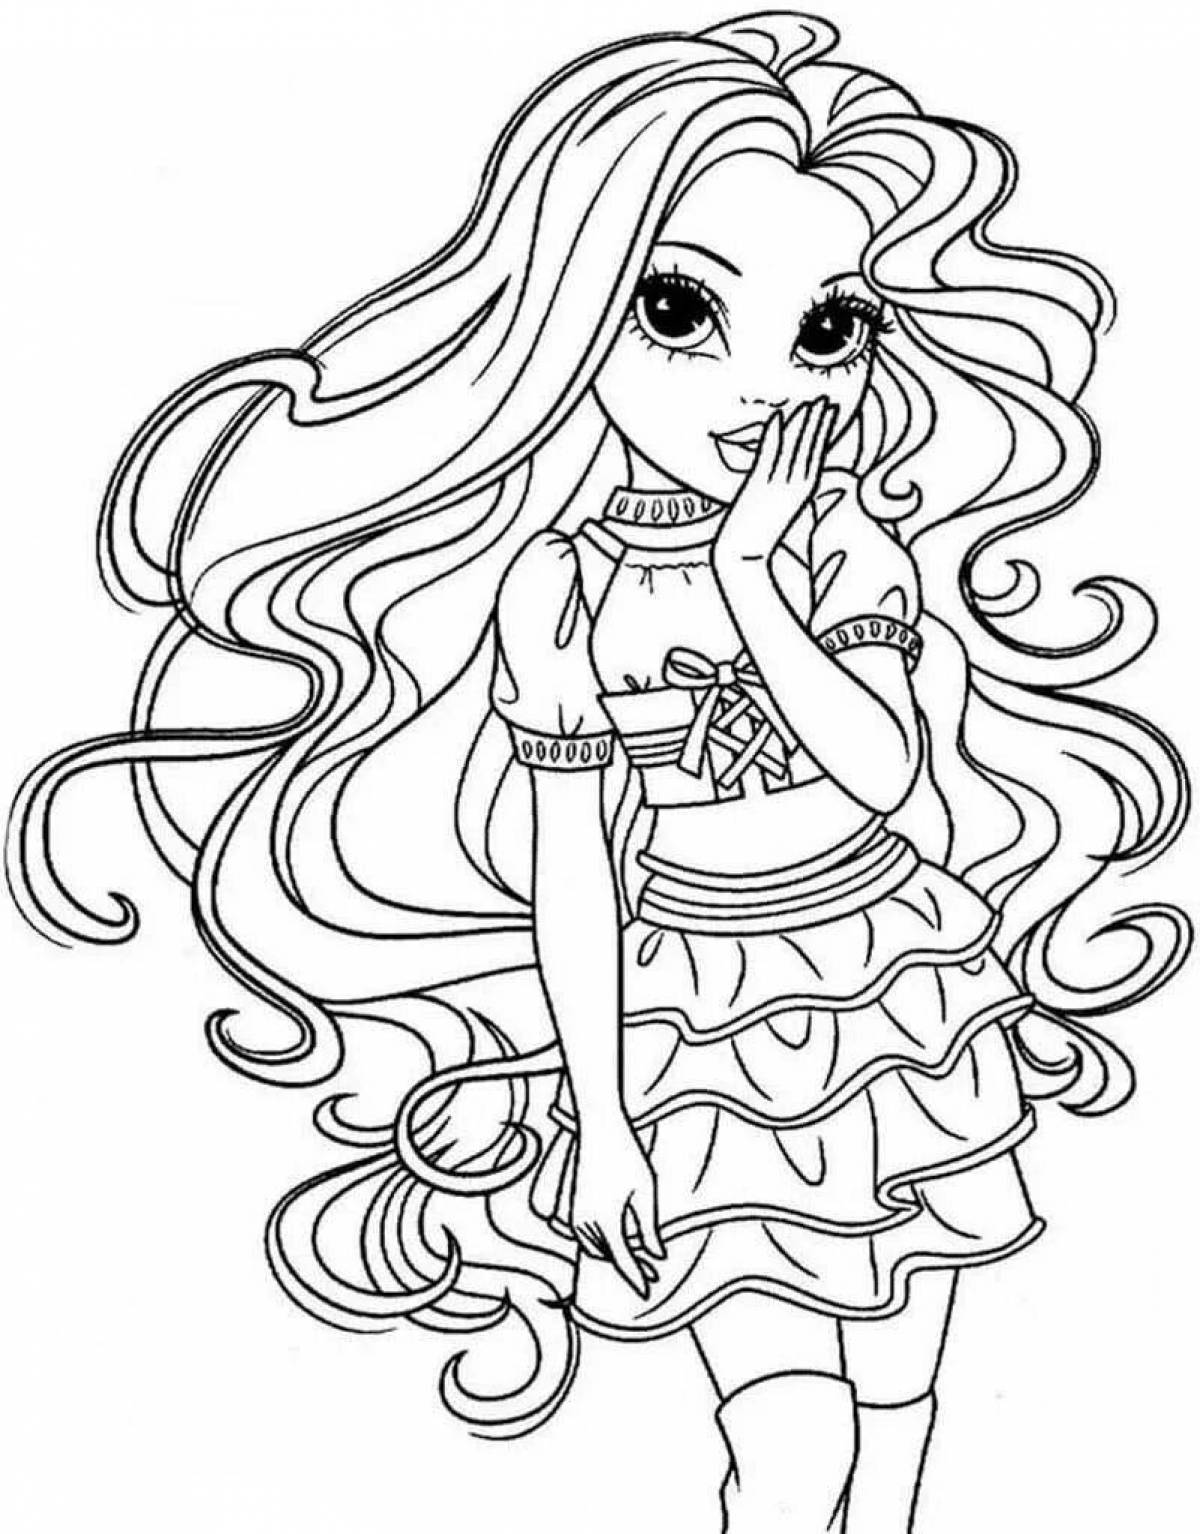 Color Explosion coloring page for 25 year old girls